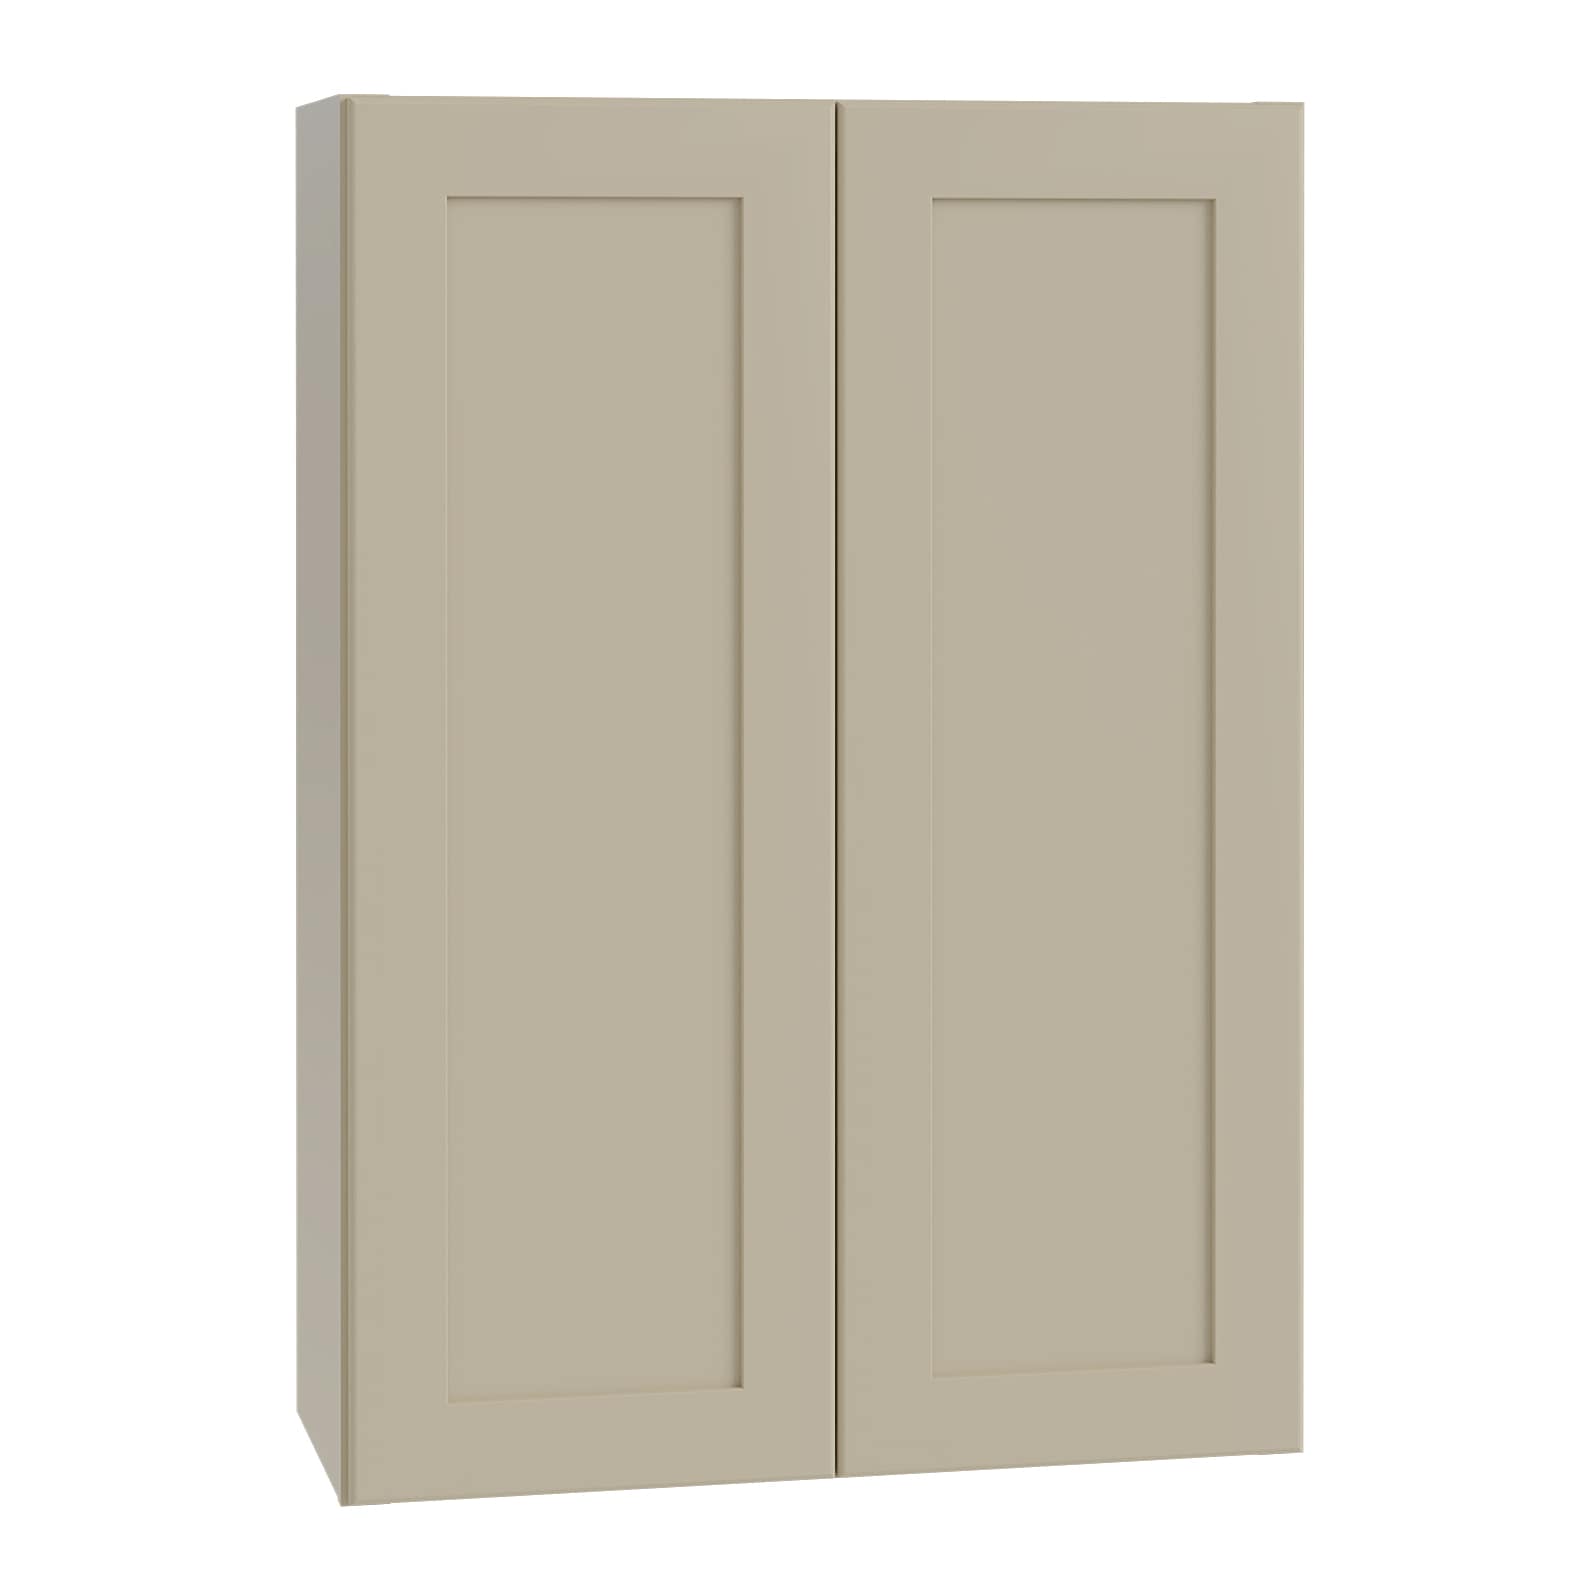 Luxxe Cabinetry 24-in W x 42-in H x 12-in D Norfolk Blended Cream Painted Door Wall Fully Assembled Semi-custom Cabinet in Off-White | W2442-NBC